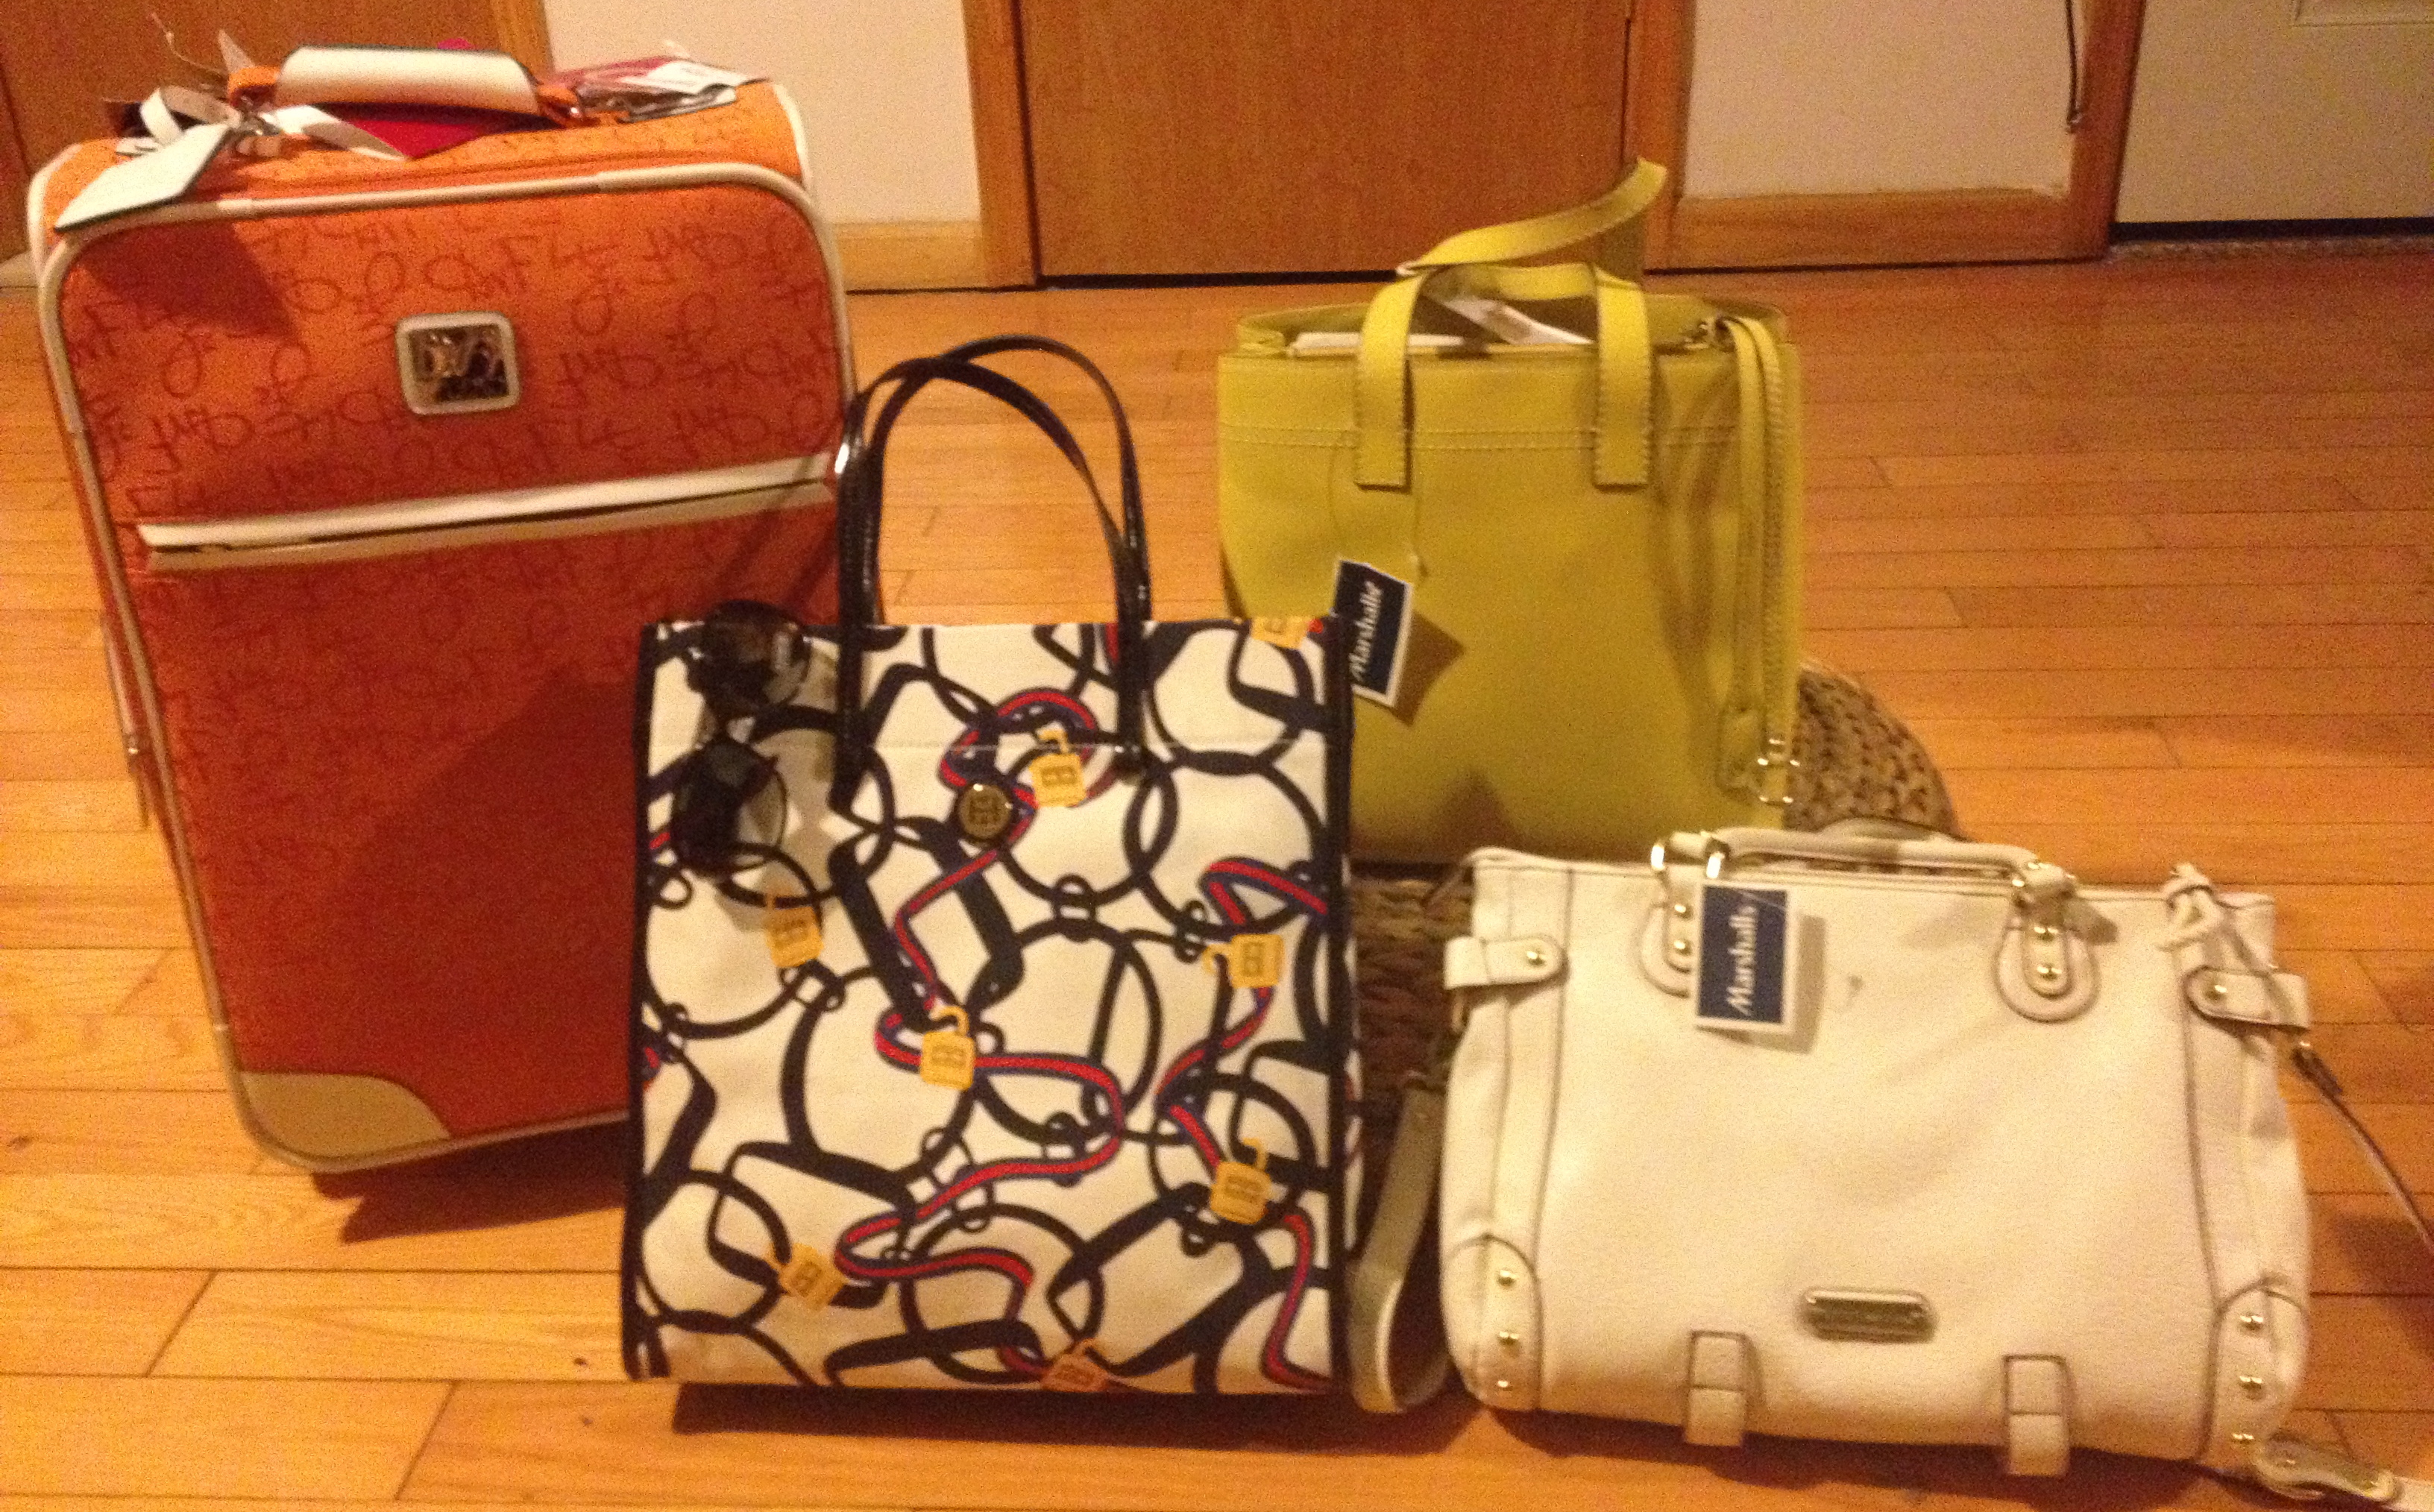 Another bag adventure. I need to visit every tjx across Canada #tjx #